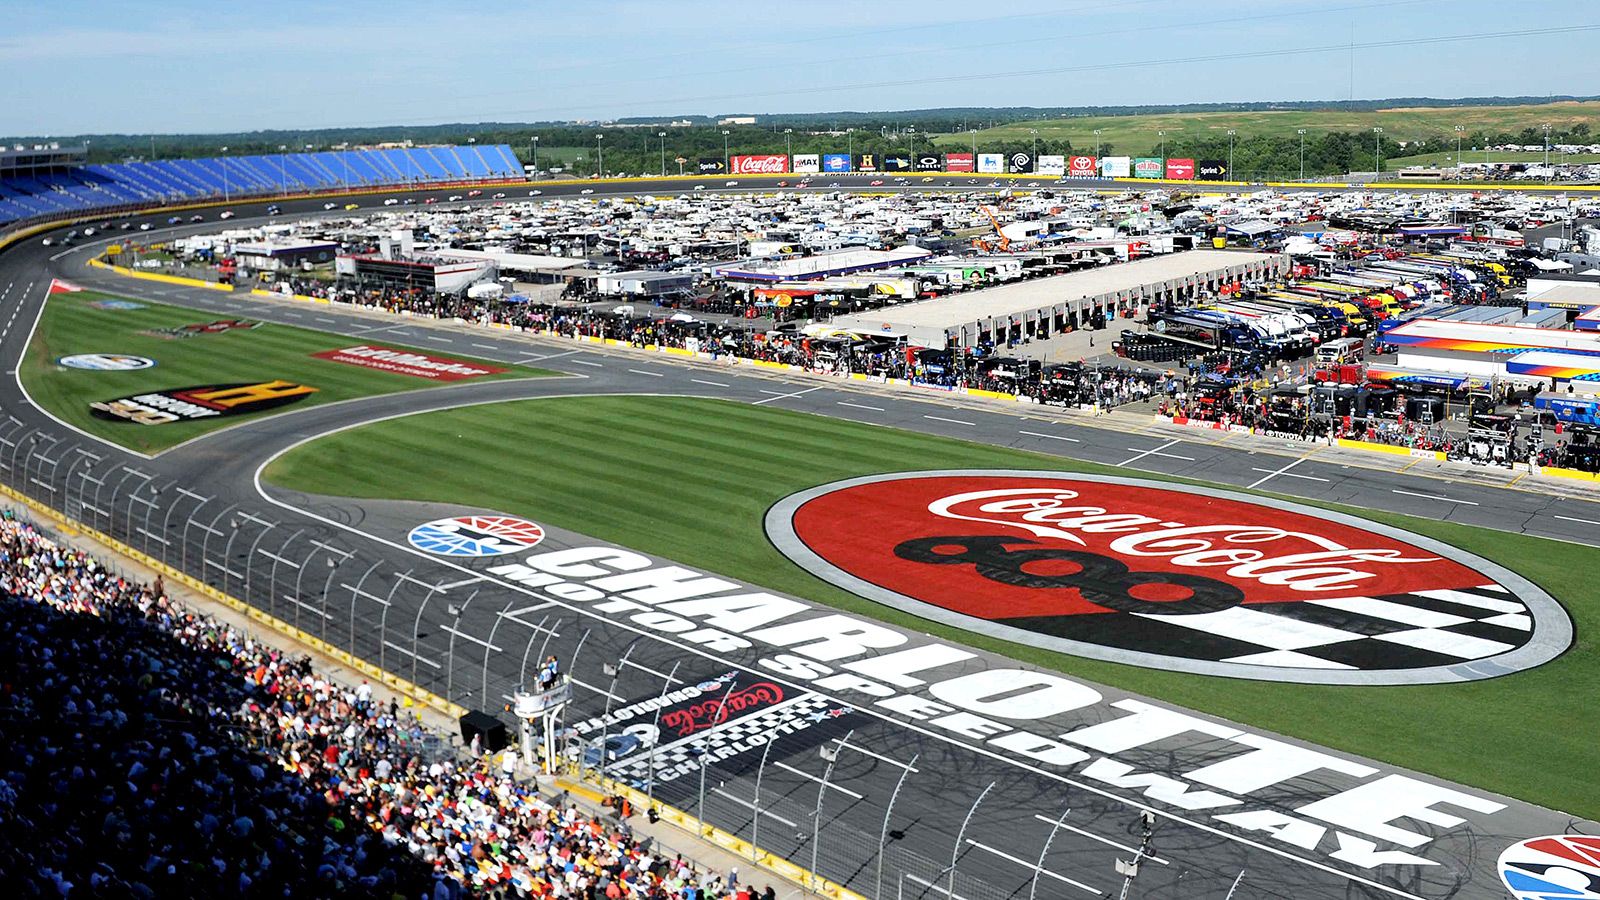 Local brewery crafts '600 Ale' for Charlotte Motor Speedway. FOX